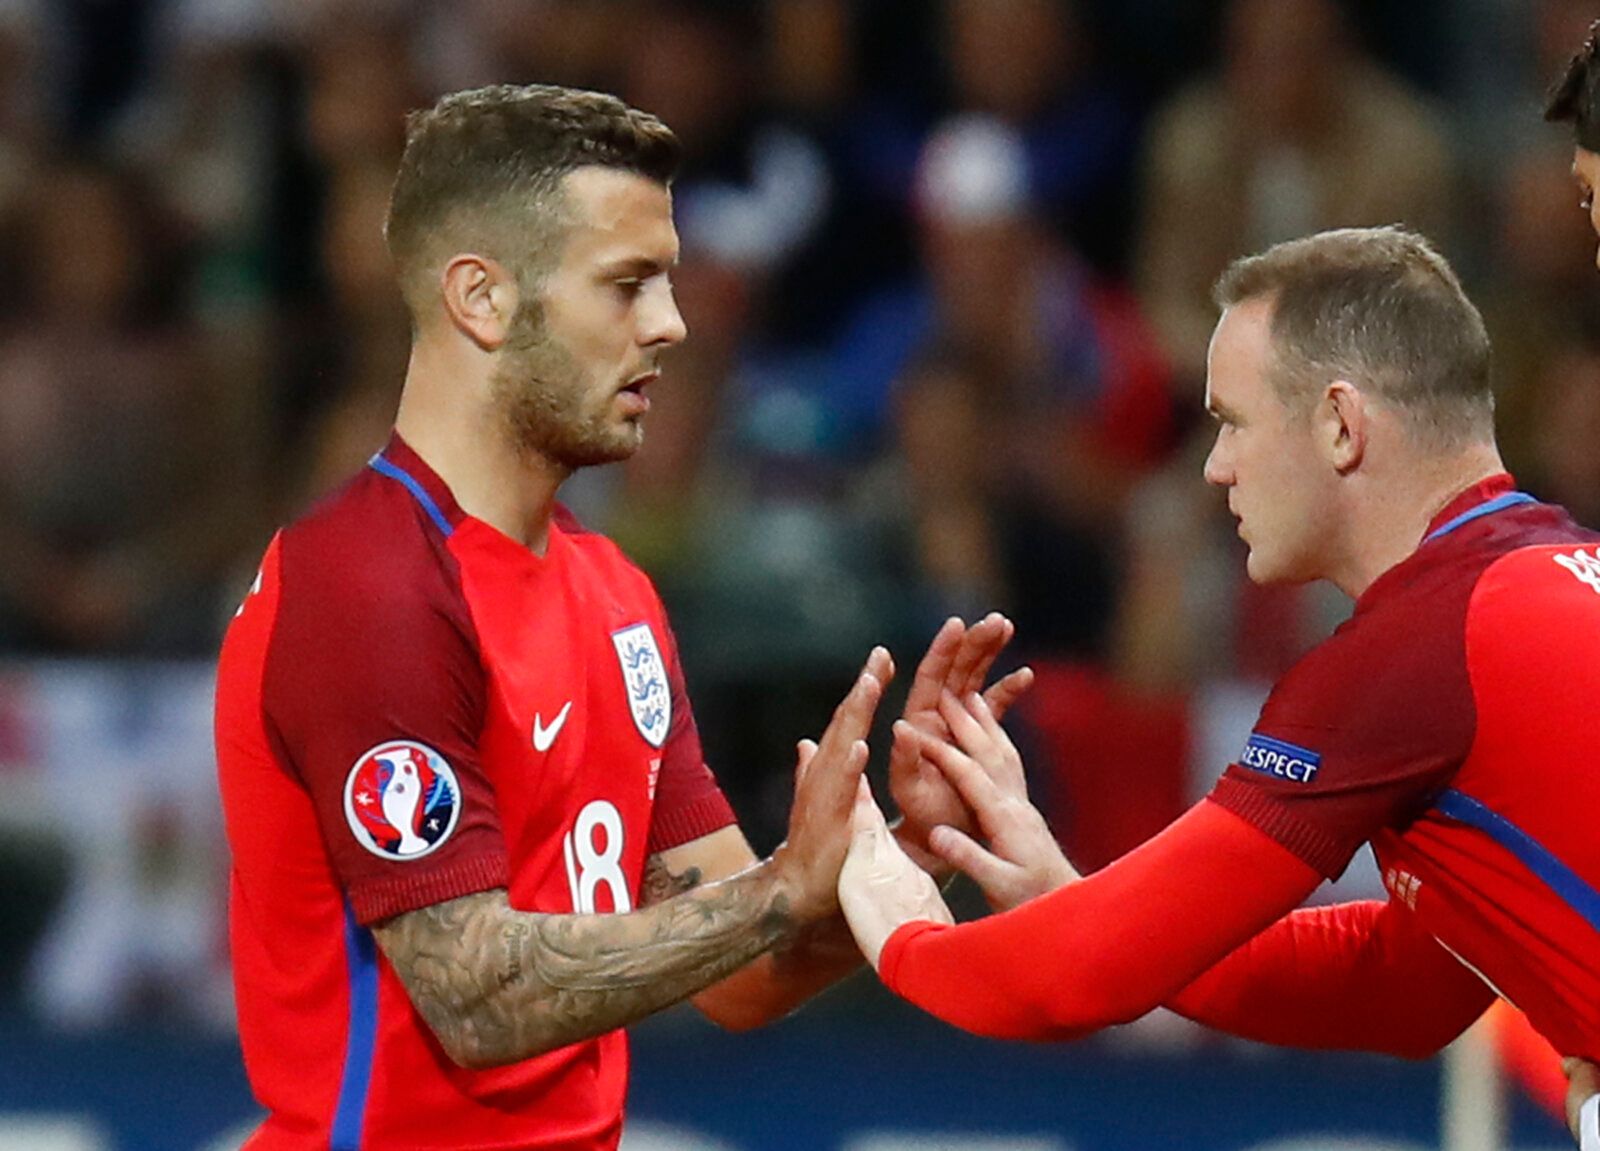 Football Soccer - Slovakia v England - EURO 2016 - Group B - Stade Geoffroy-Guichard, Saint-?tienne, France - 20/6/16
England's Wayne Rooney is substituted on for Jack Wilshere 
REUTERS/Kai Pfaffenbach
Livepic